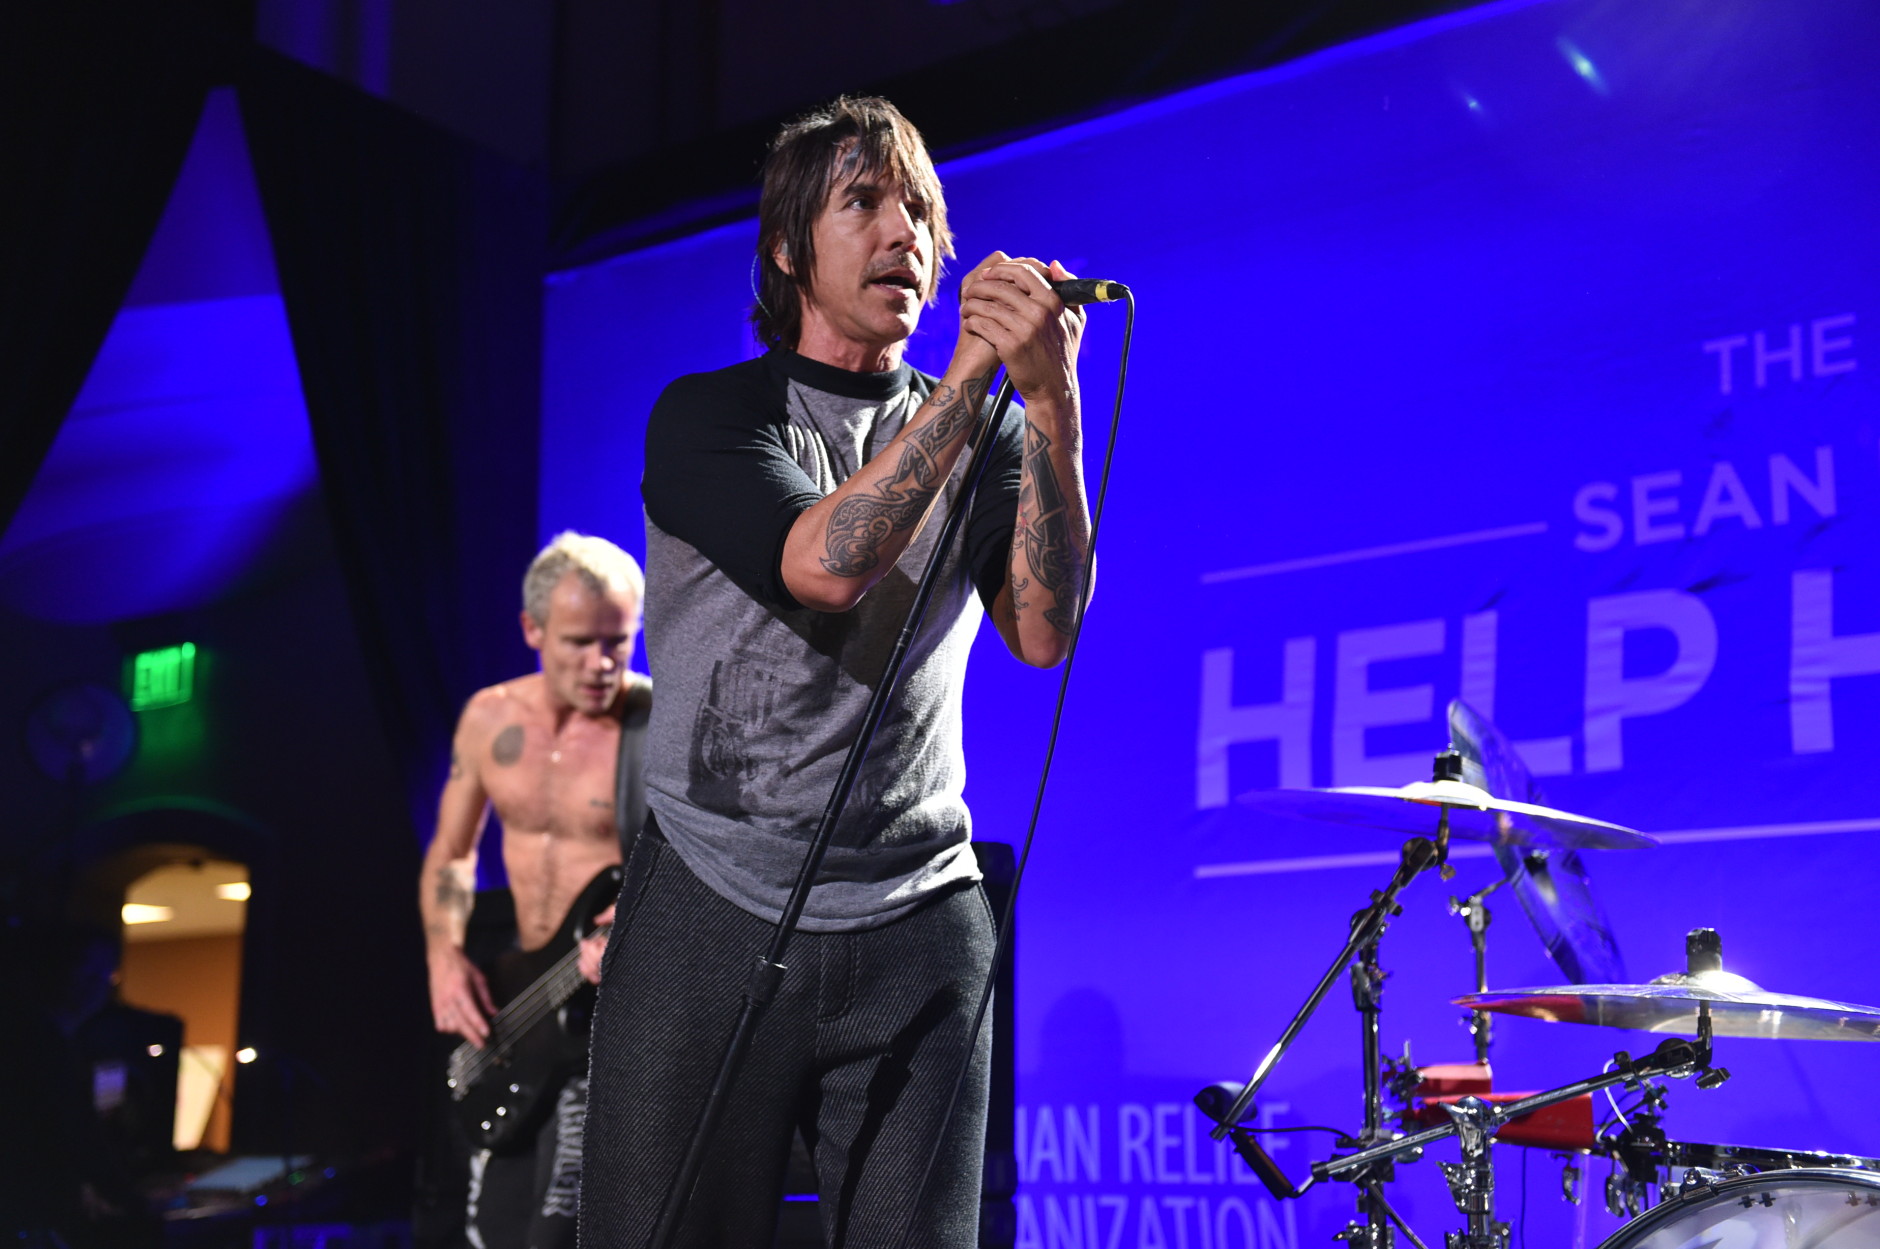 Michael "Flea" Balzary, left, and Anthony Kiedis of the Red Hot Chili Peppers perform on stage at Sean Penn And Friends "Help Haiti Home" Gala - Show at the Montage Hotel on Saturday, Jan. 10, 2015 in Beverly Hills, Calif.  (Photo by John Shearer/Invision/AP)